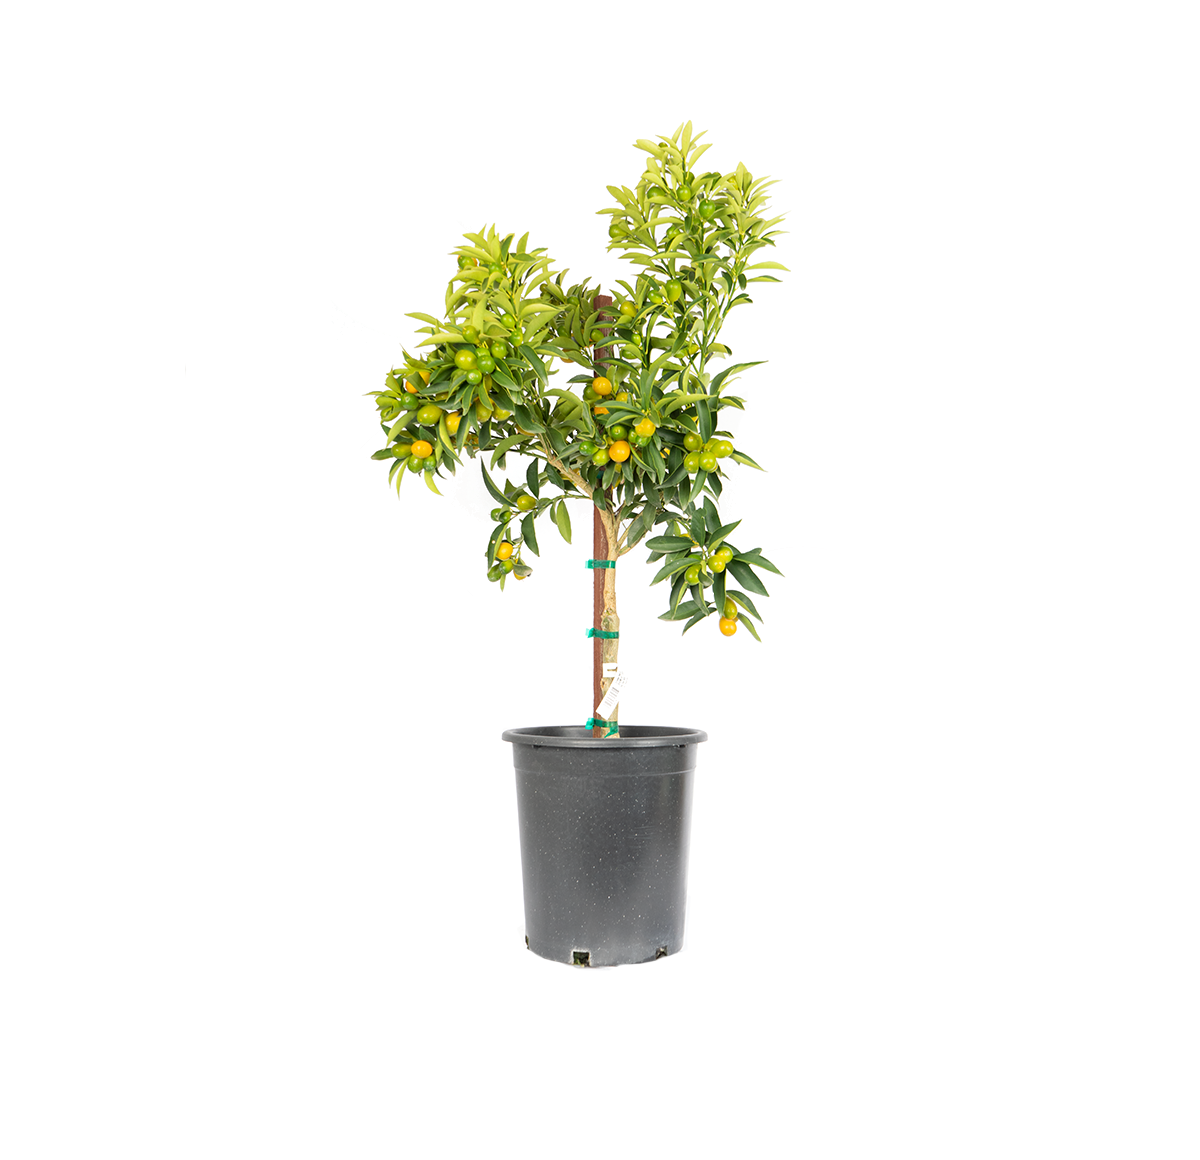 single potted nagami kumquat, mall tree loads its dense branches with bright orange colors and is a tart tasting fruit